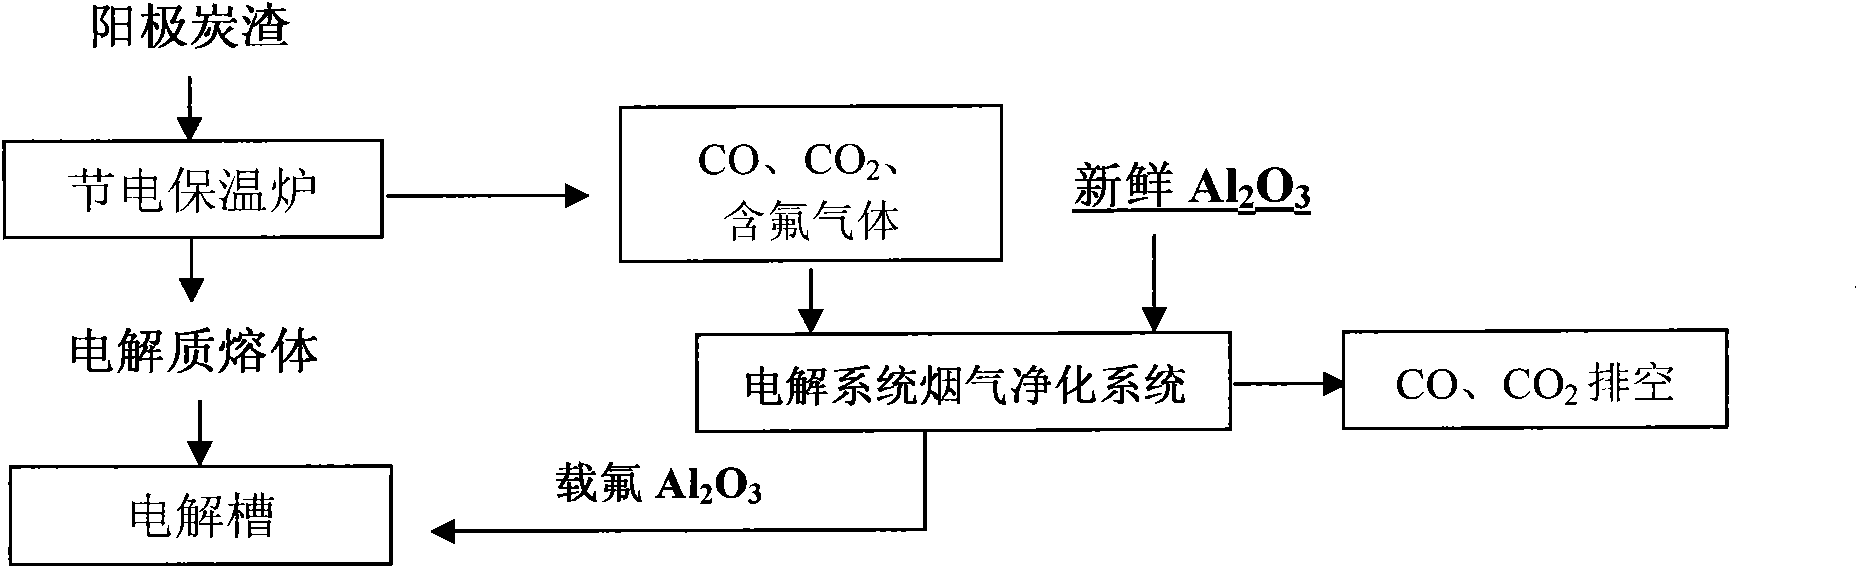 Method for innocent treatment of aluminum electrolysis anode carbon residue and recovery of electrolyte